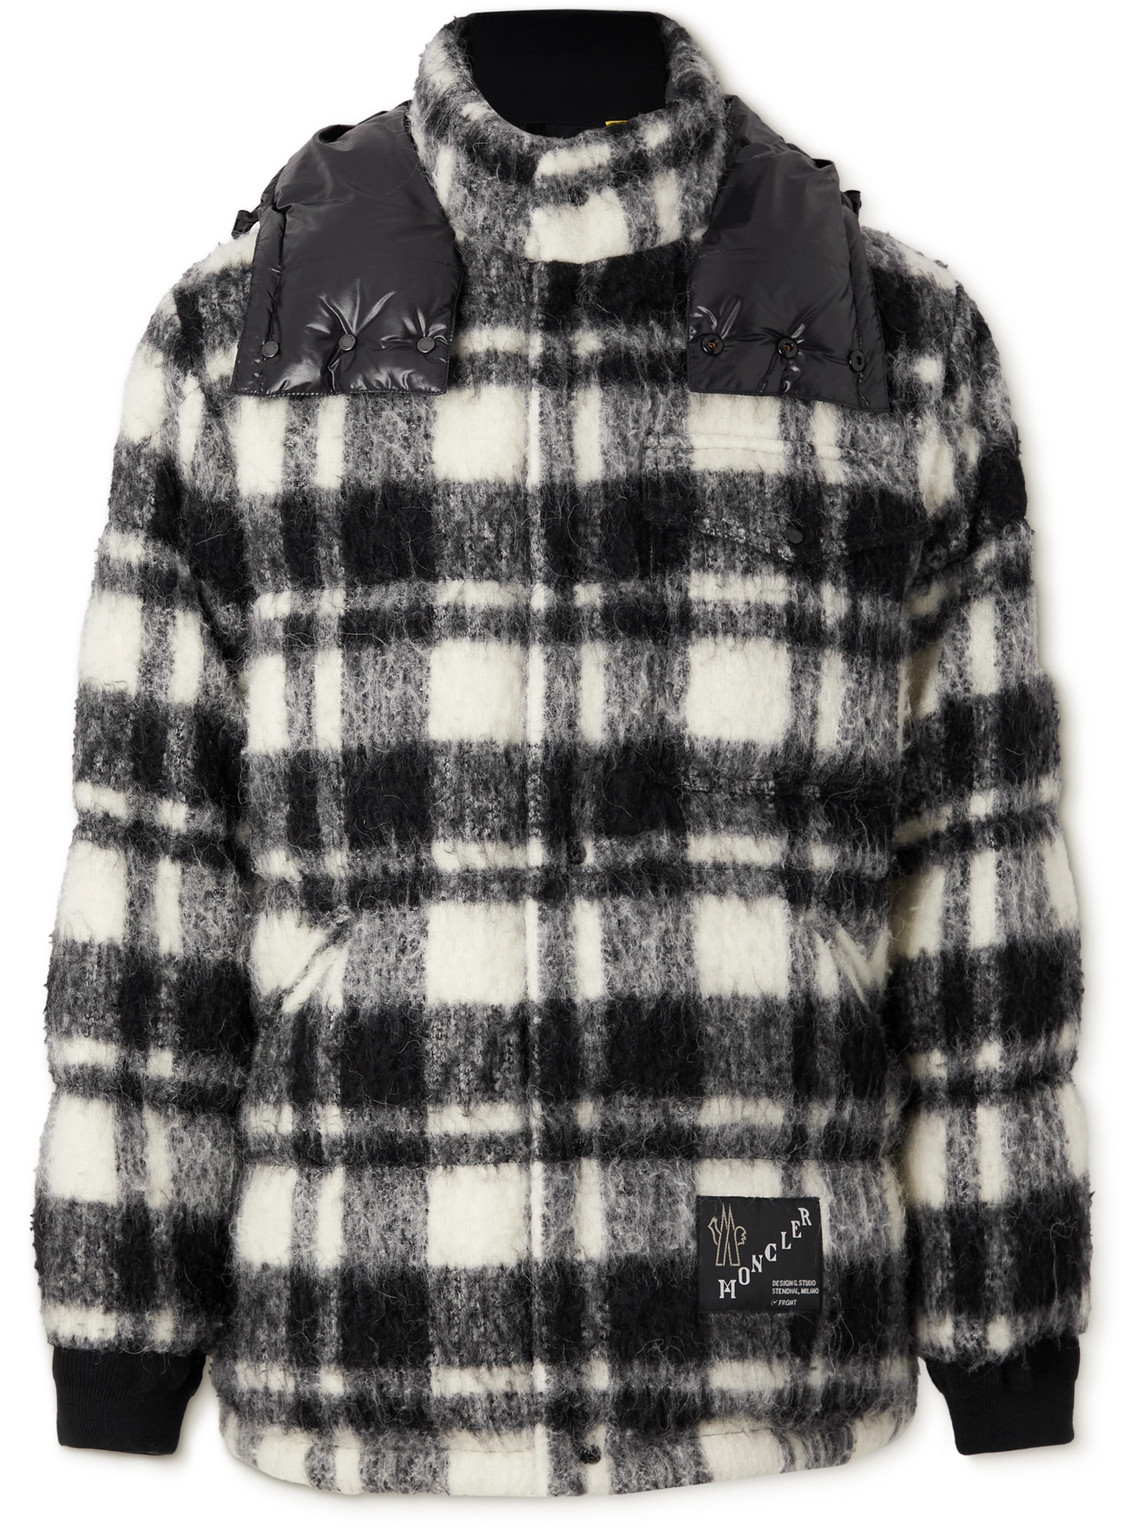 MONCLER GENIUS 7 MONCLER FRAGMENT CHECKED TEXTURED-KNIT HOODED DOWN JACKET